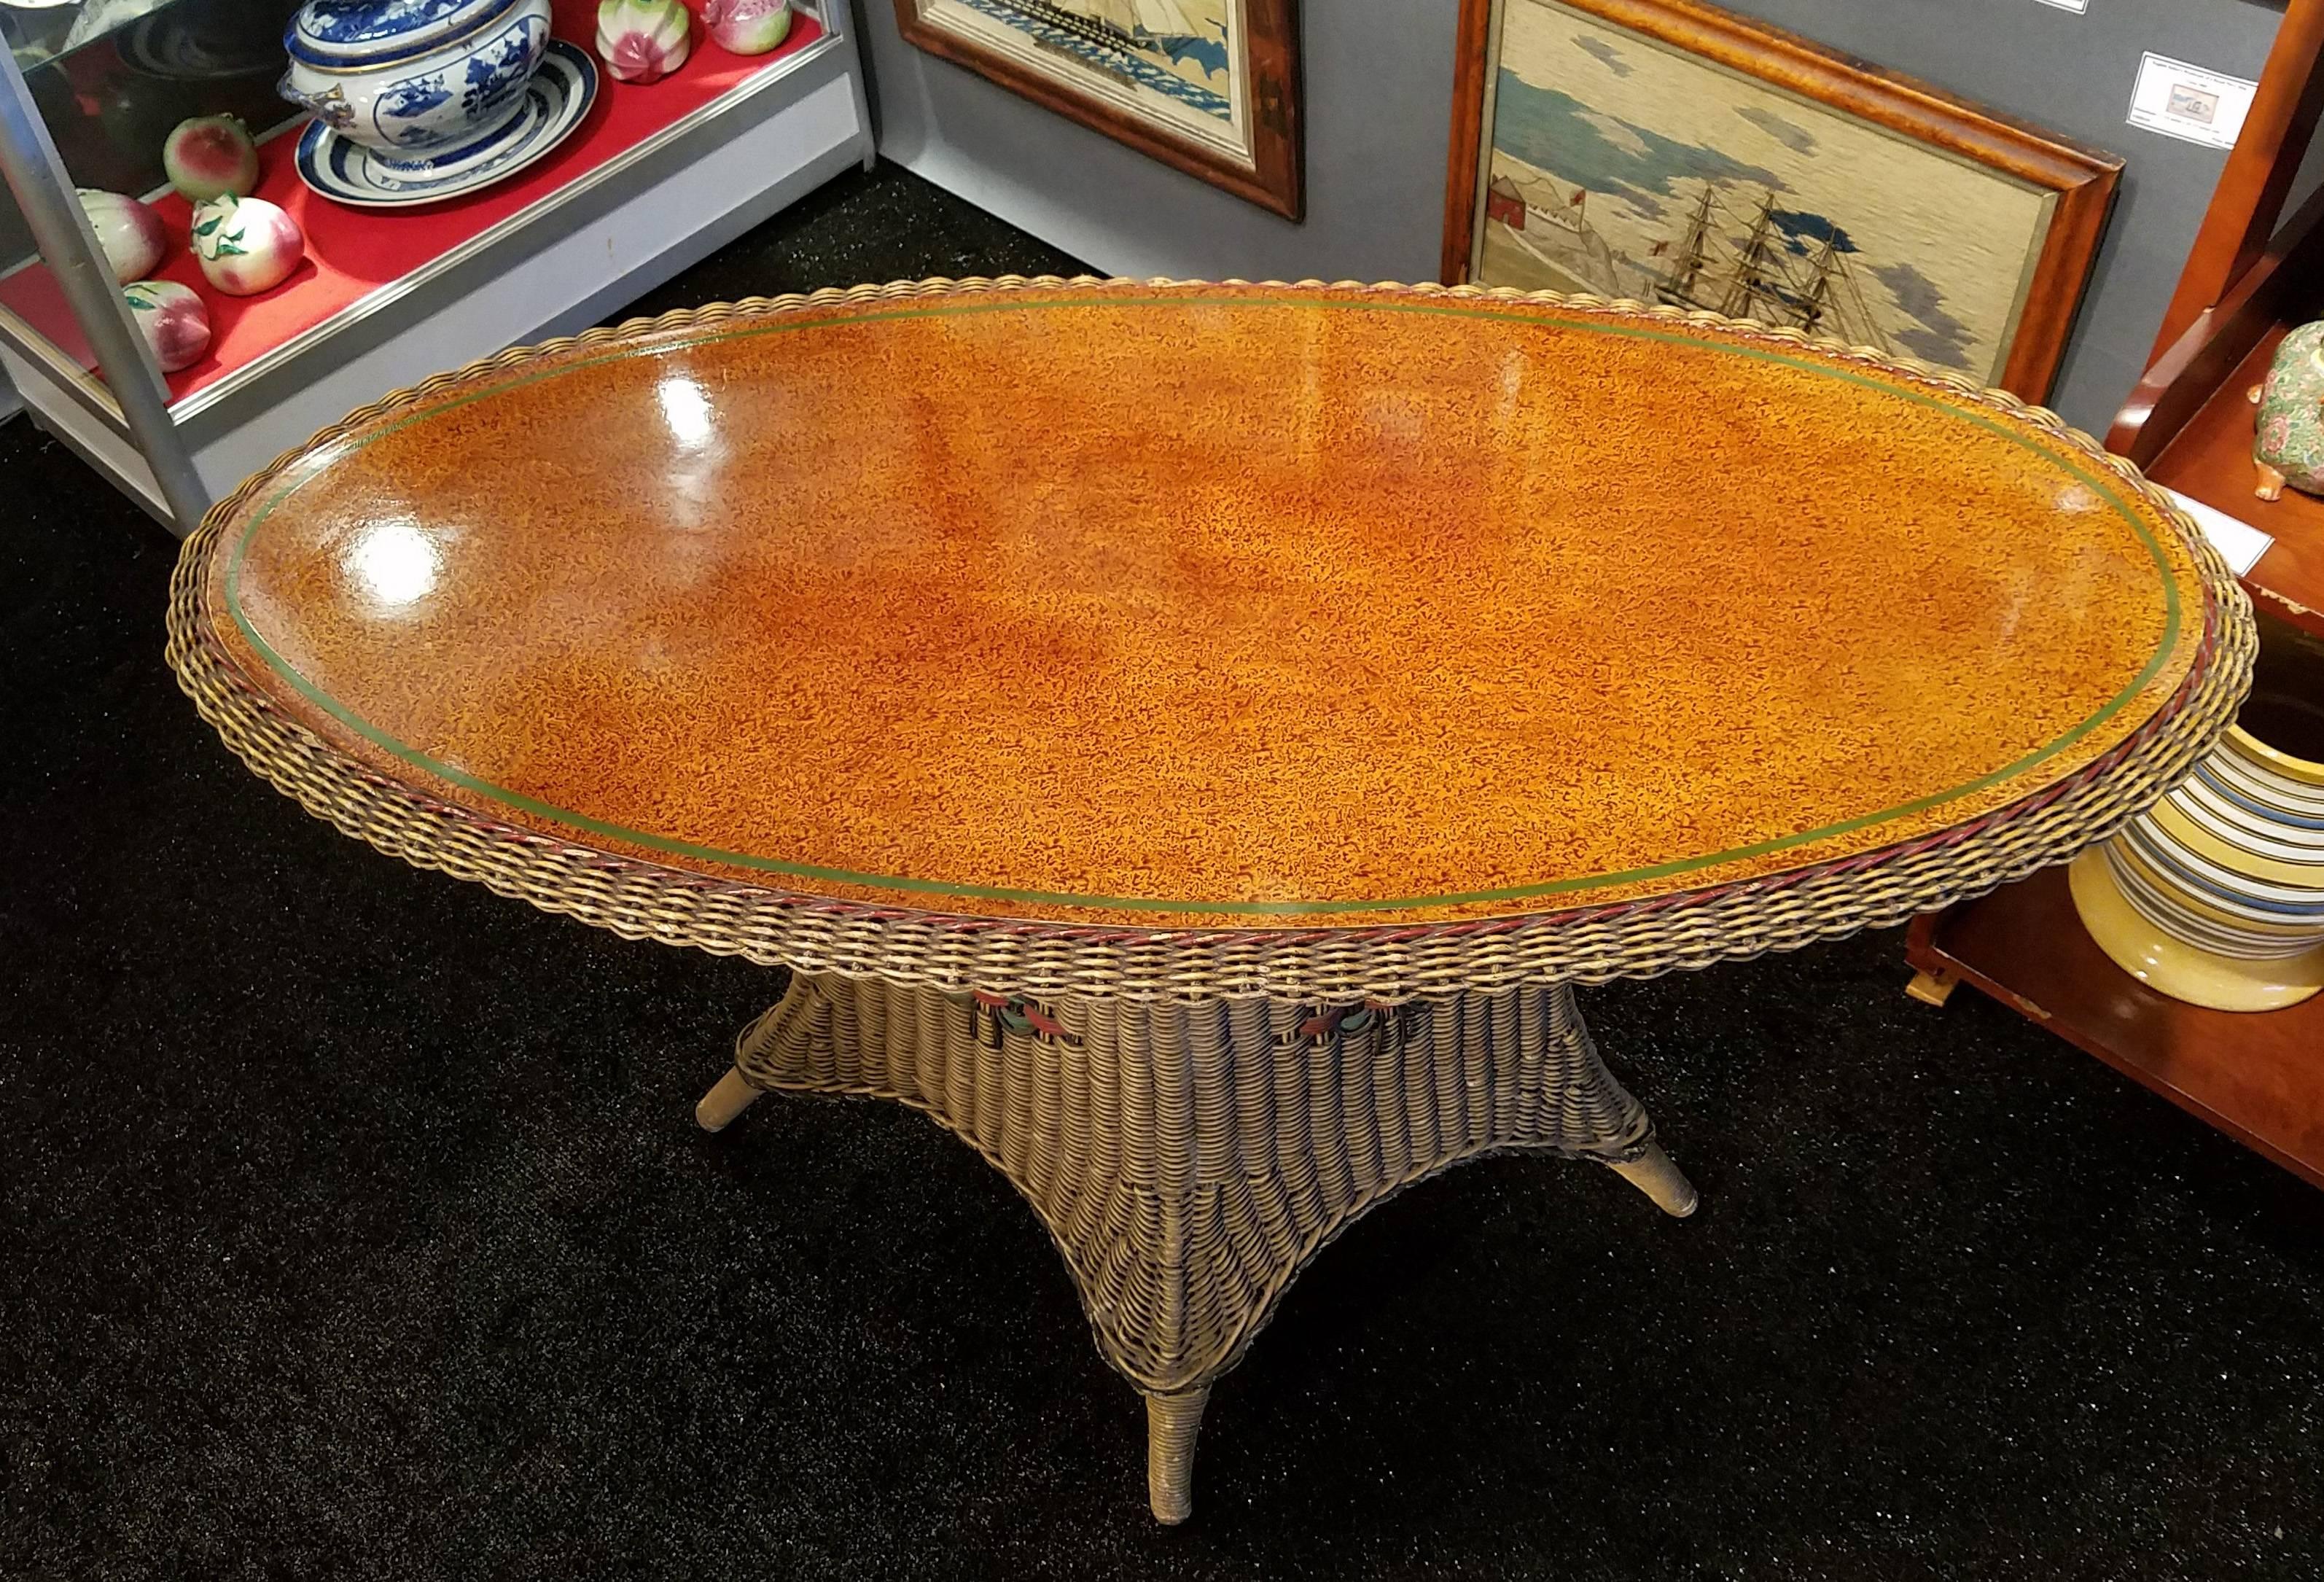 American Wicker Large Table with Grain-painted top,
By Merikord American Chair Company,
Circa 1920s.

The table has a large oval painted wood inset top inset on a wicker square base with original paint.

The table was used in Woody Allen's next